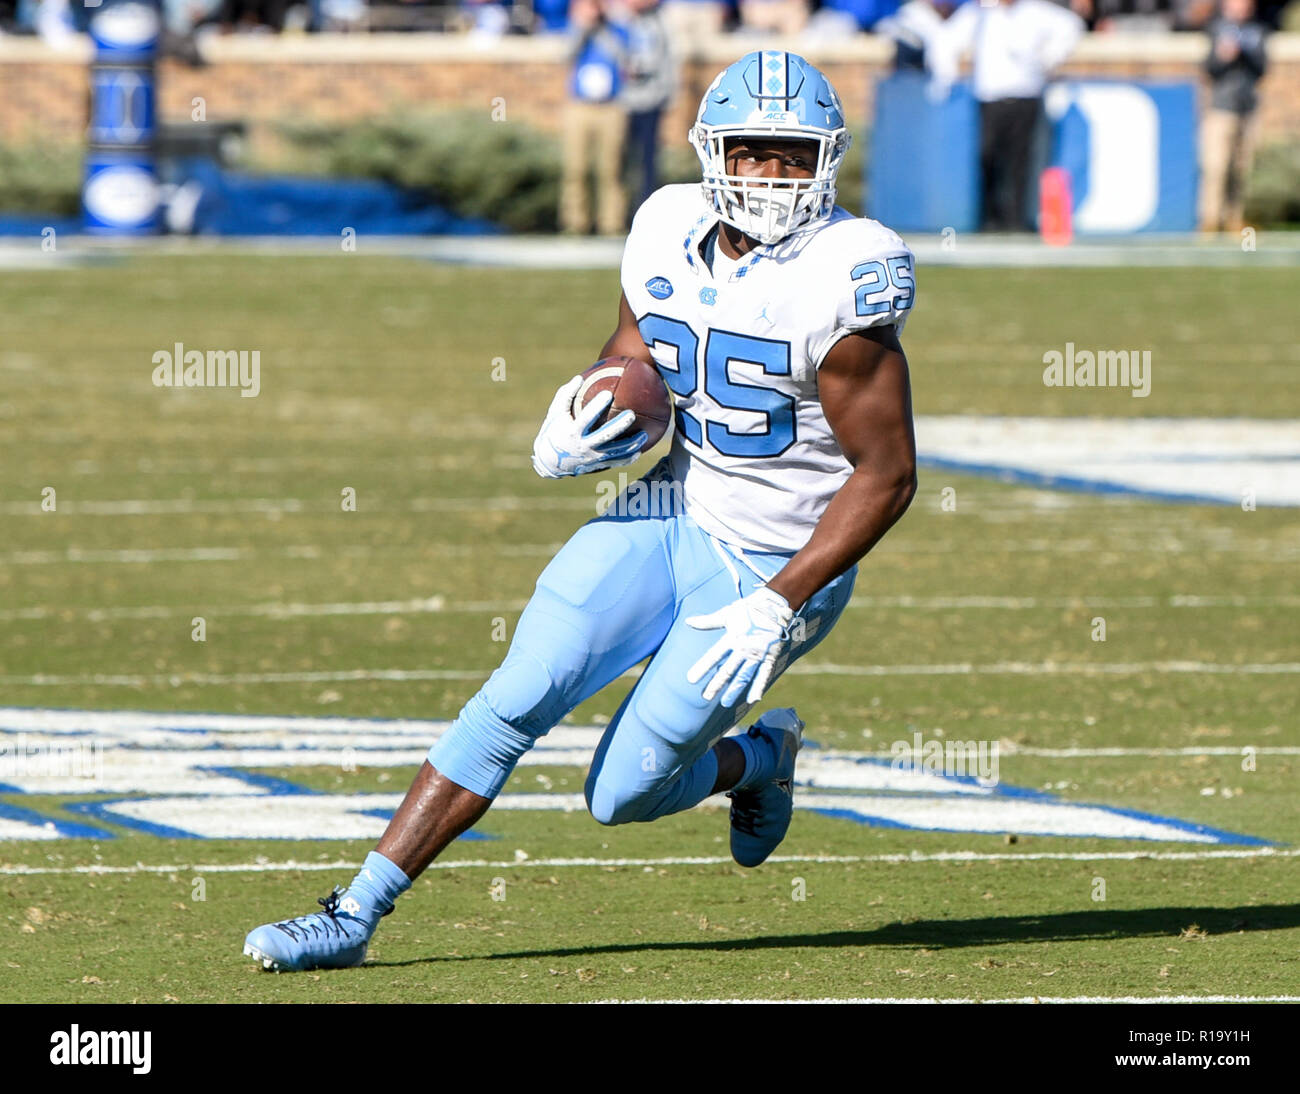 Durham, North Carolina, USA. 10th Nov, 2018. UNC running back JAVONTE WILLIAMS (25) running the ball against the Duke Blue Devils on November 10, 2018 at Wallace Wade Stadium in Durham, NC. Credit: Ed Clemente/ZUMA Wire/Alamy Live News Stock Photo